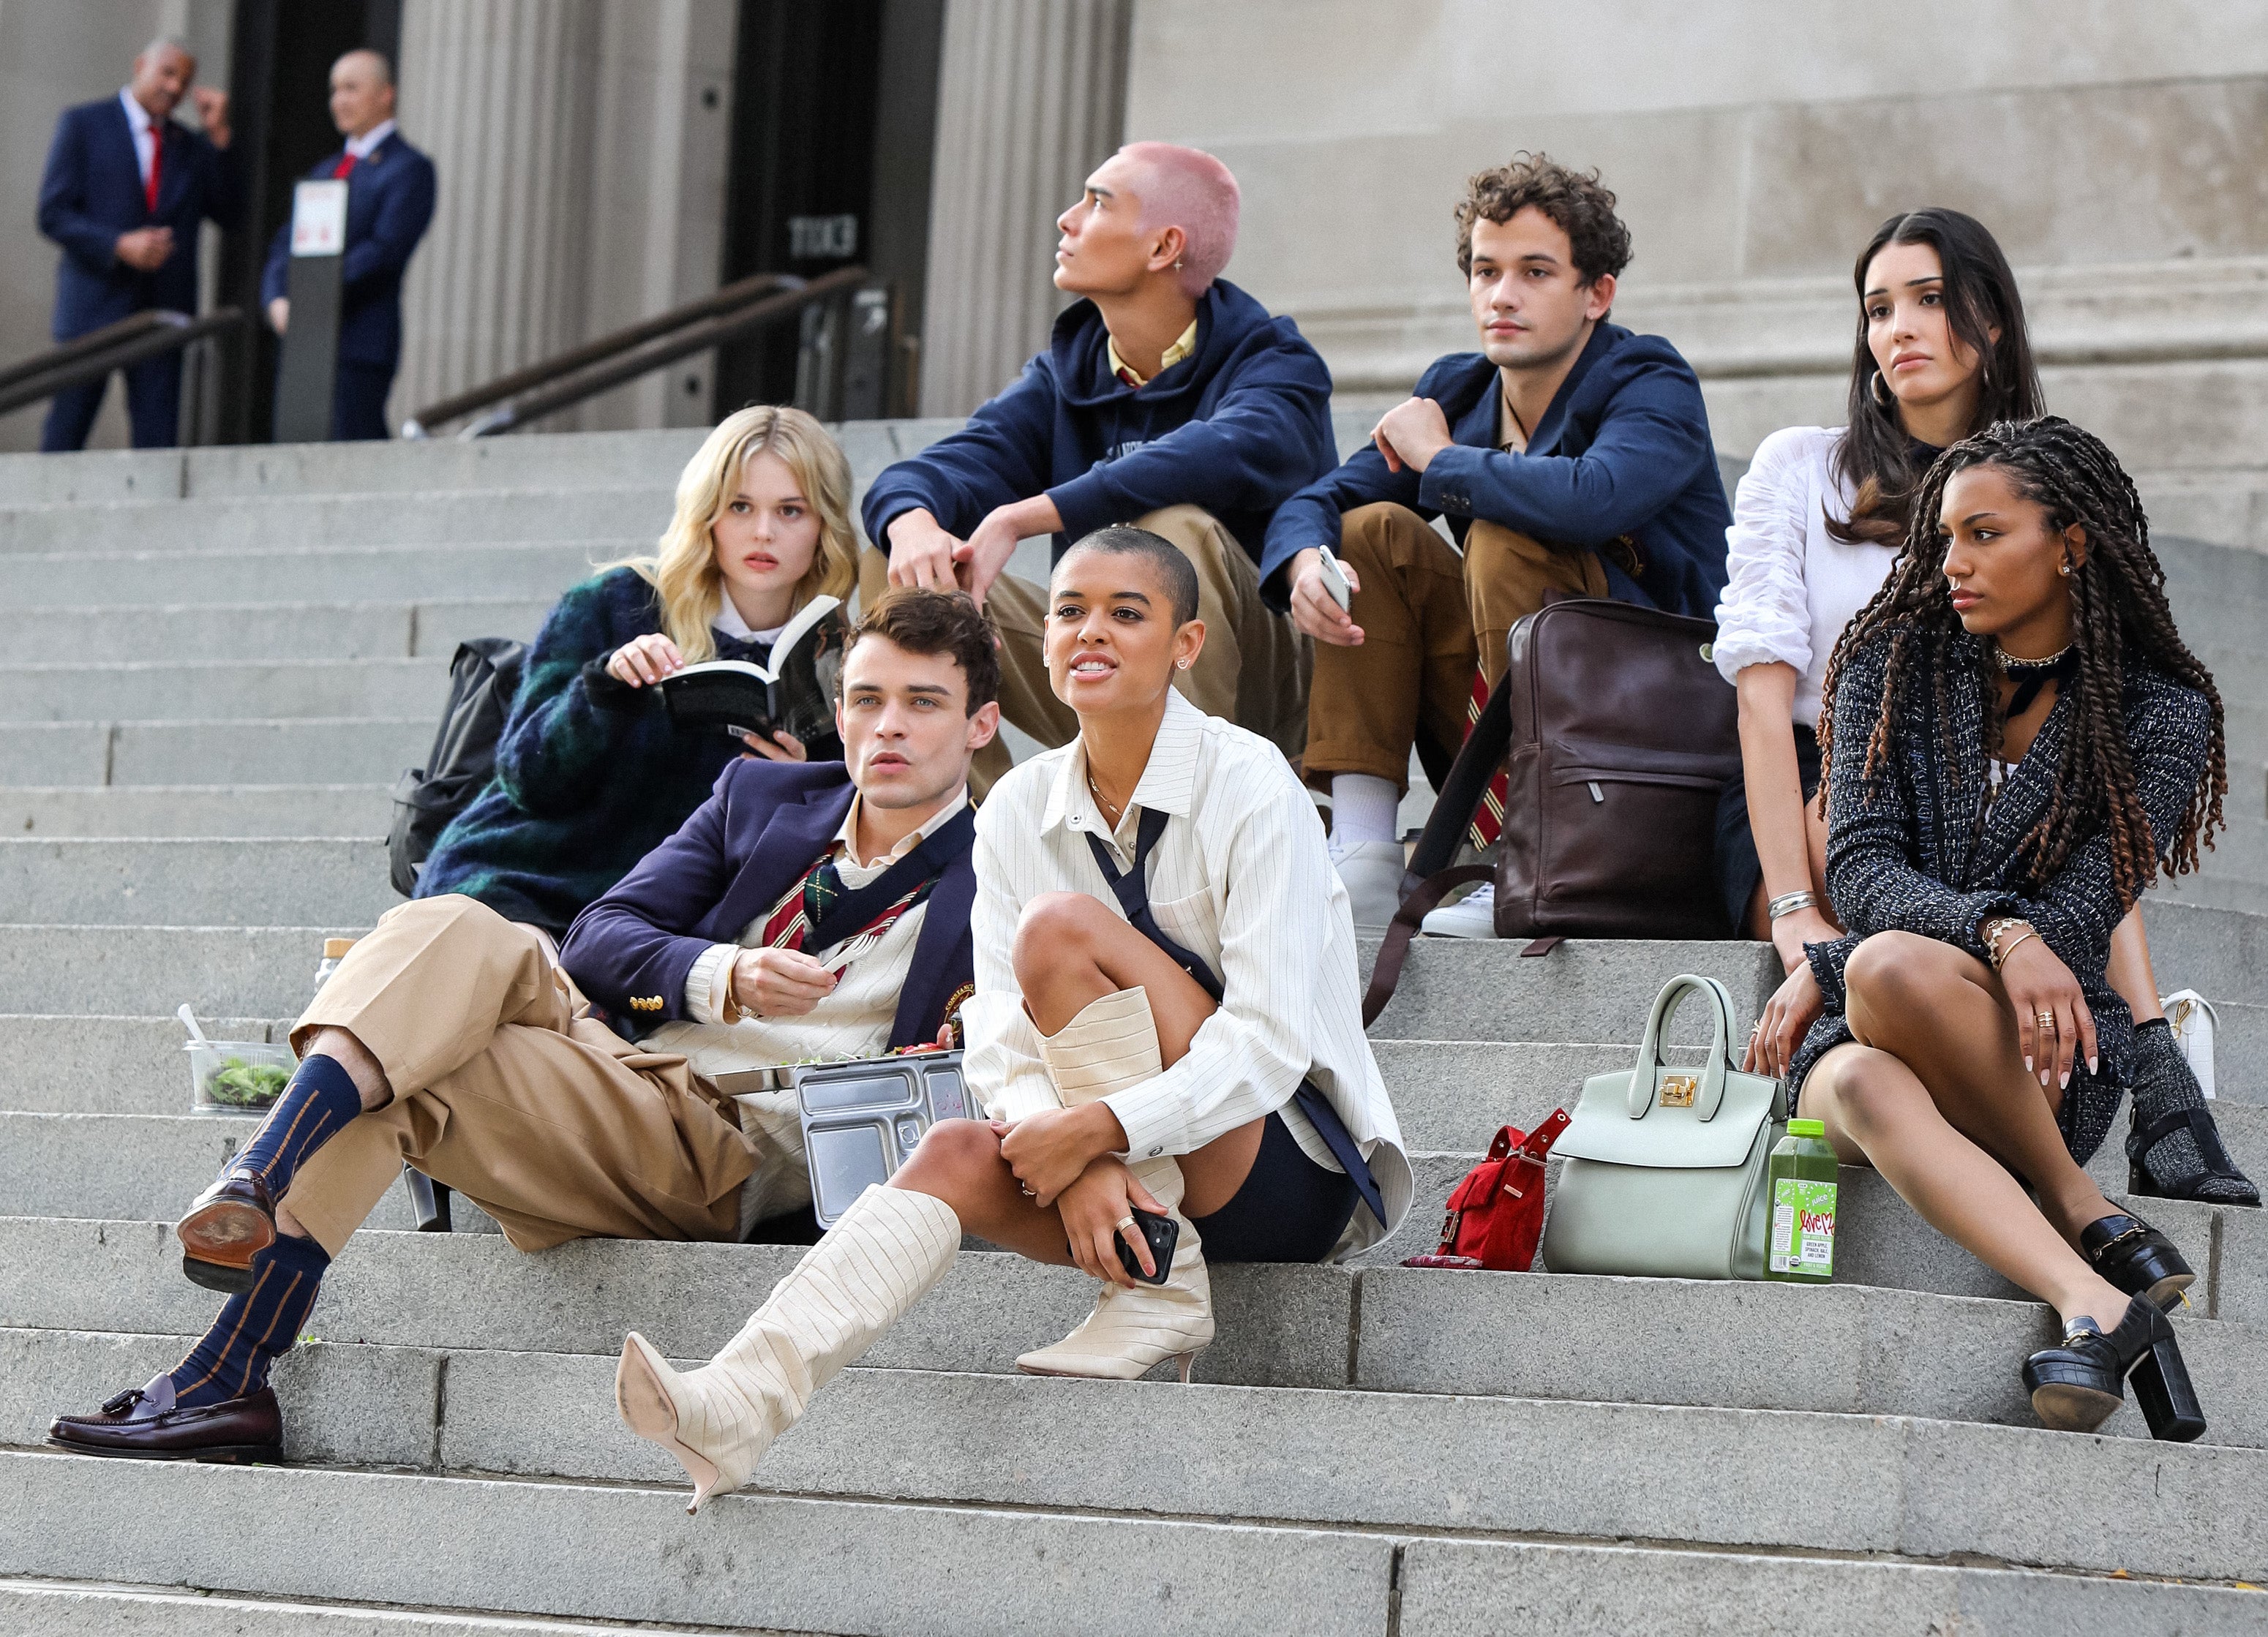 Is Gossip Girl coming back with the original cast after the reboot was  axed?